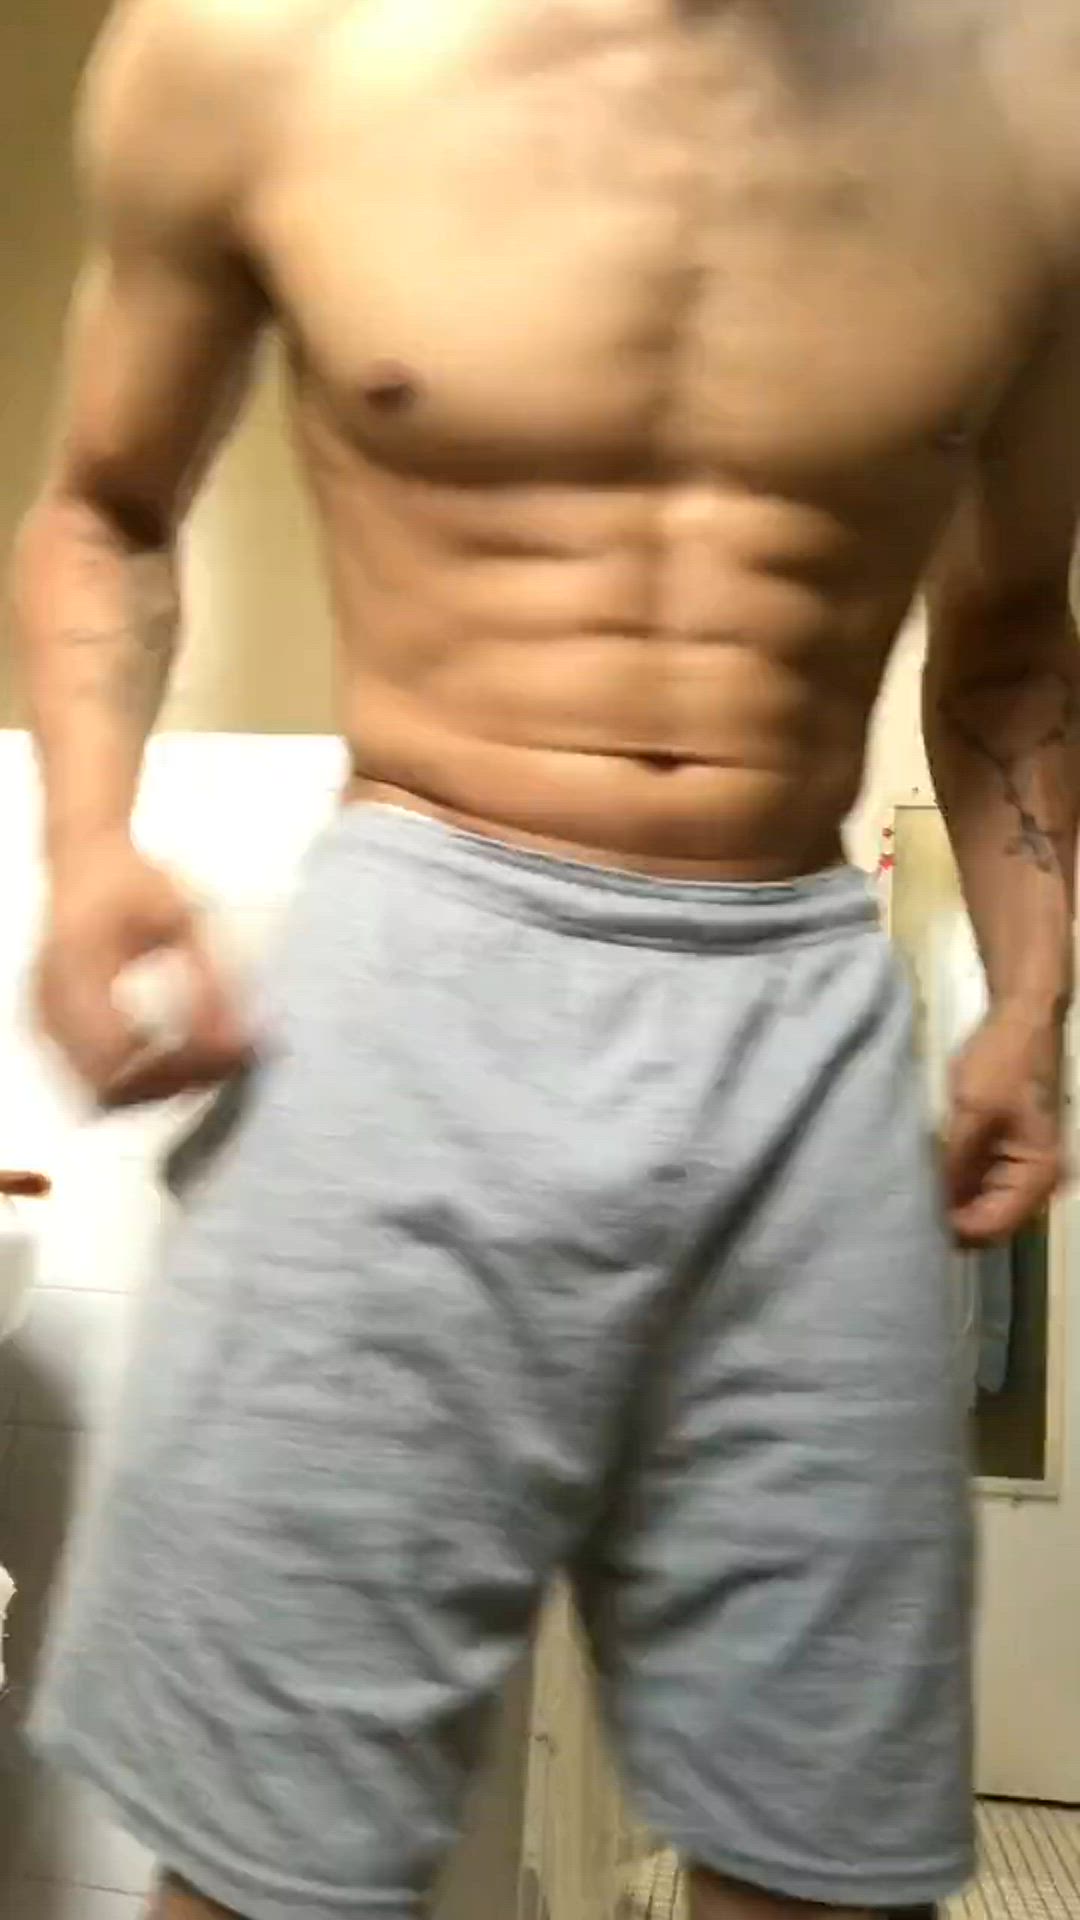 BBC porn video with onlyfans model platanomaduros <strong>@oiledworkouts</strong>